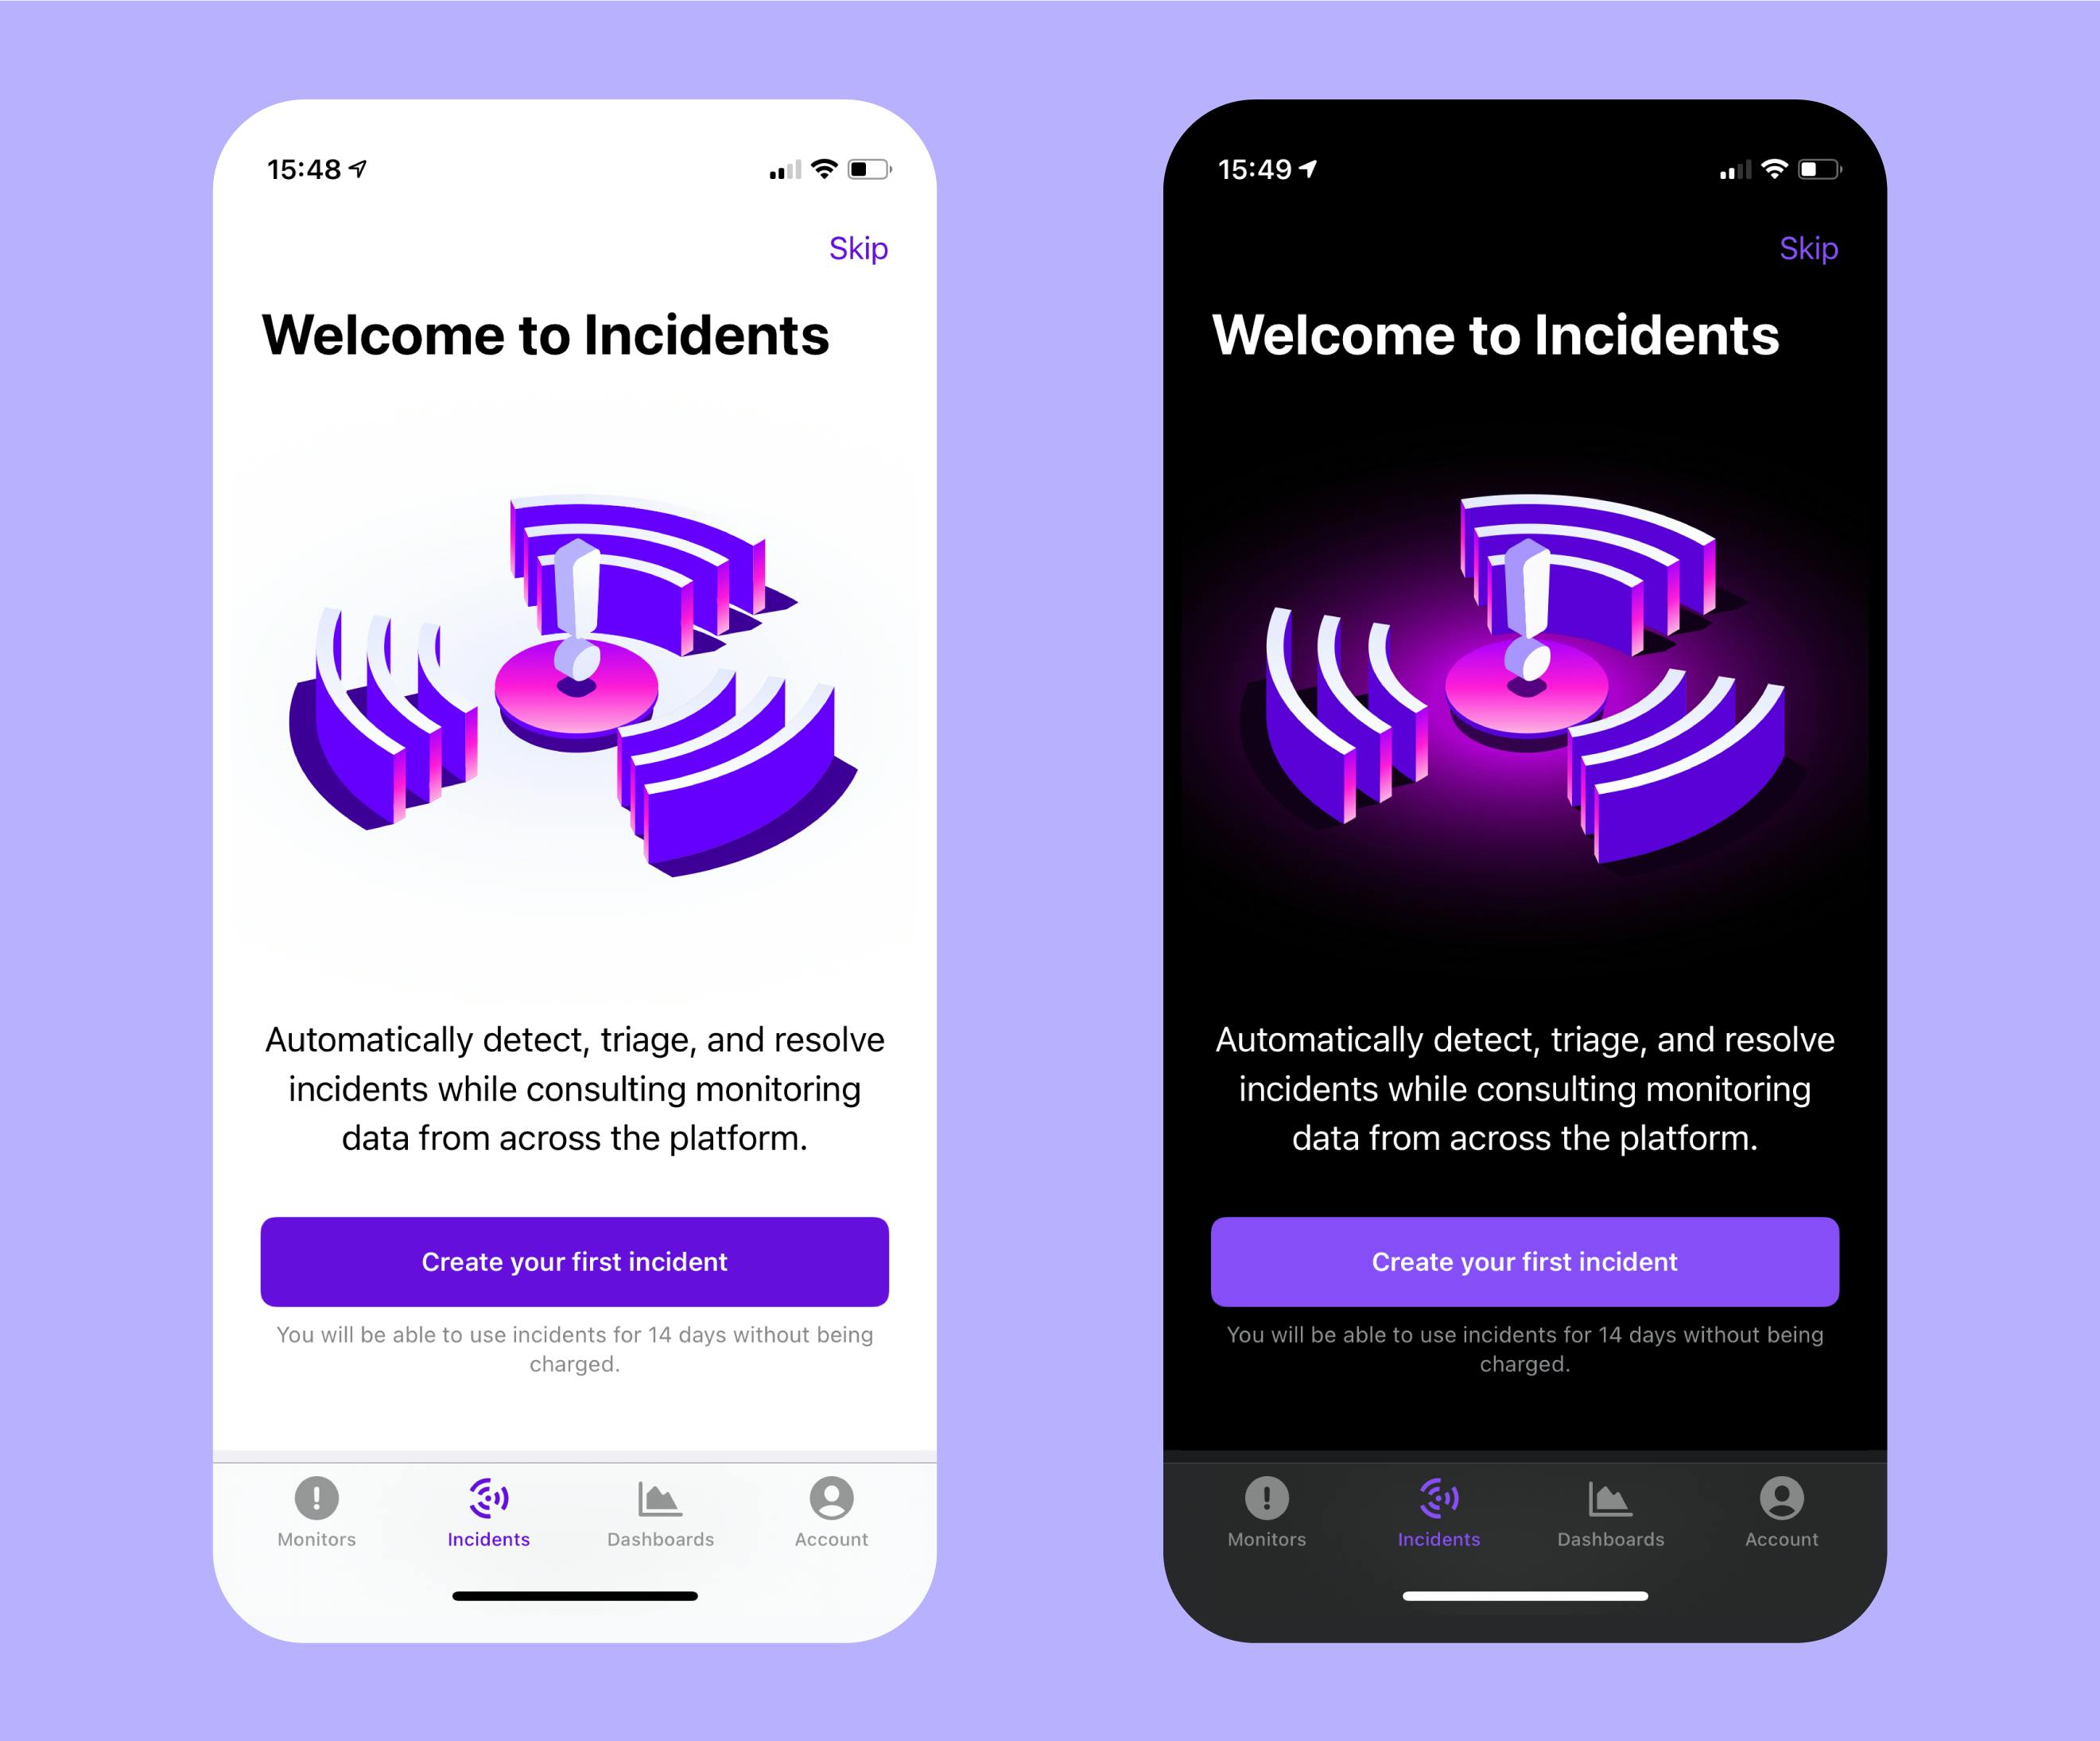 The Incident Management illustration in the context it was designed for- the Incidents welcome page of the Datadog app. On the left, the mobile welcome screen is shown in light mode and on the right, the mobile screen is shown in dark mode. The two screencaptures are arranged on a lilac background.